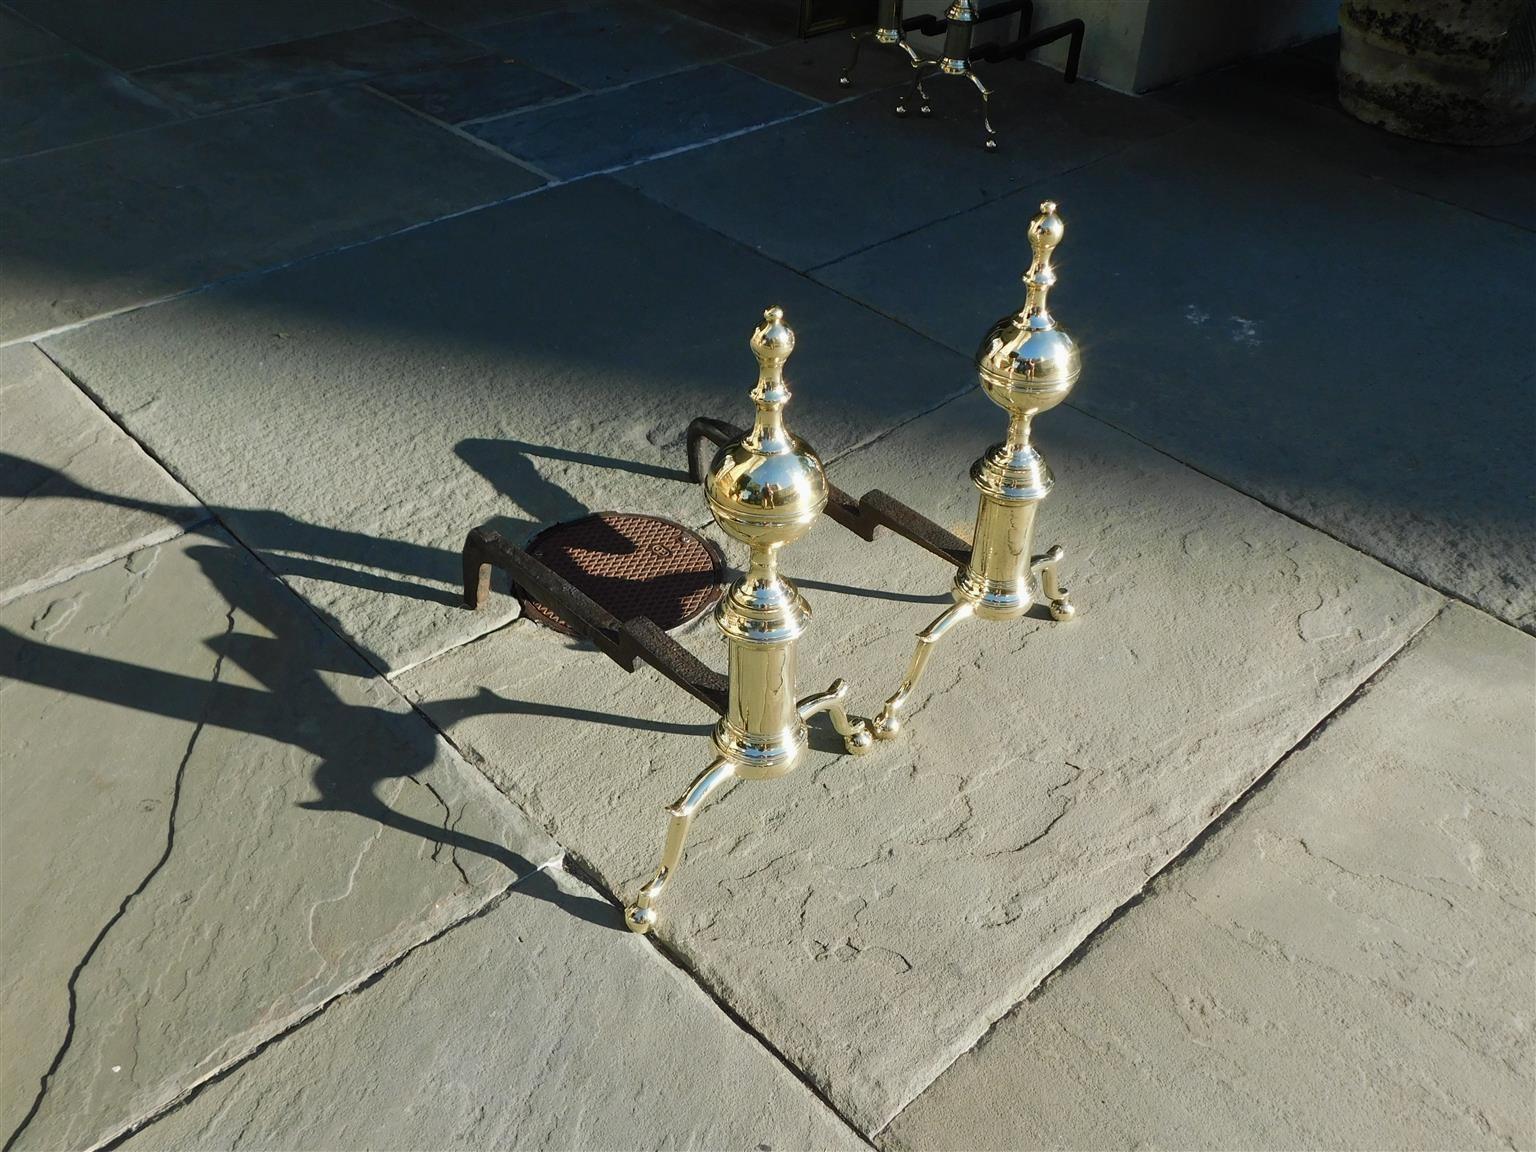 Pair of American brass flanking ball banded finial andirons with circular plinths, spur legs, original wrought iron rear dog legs, and resting on ball feet. Boston, mass. Early 19th century.